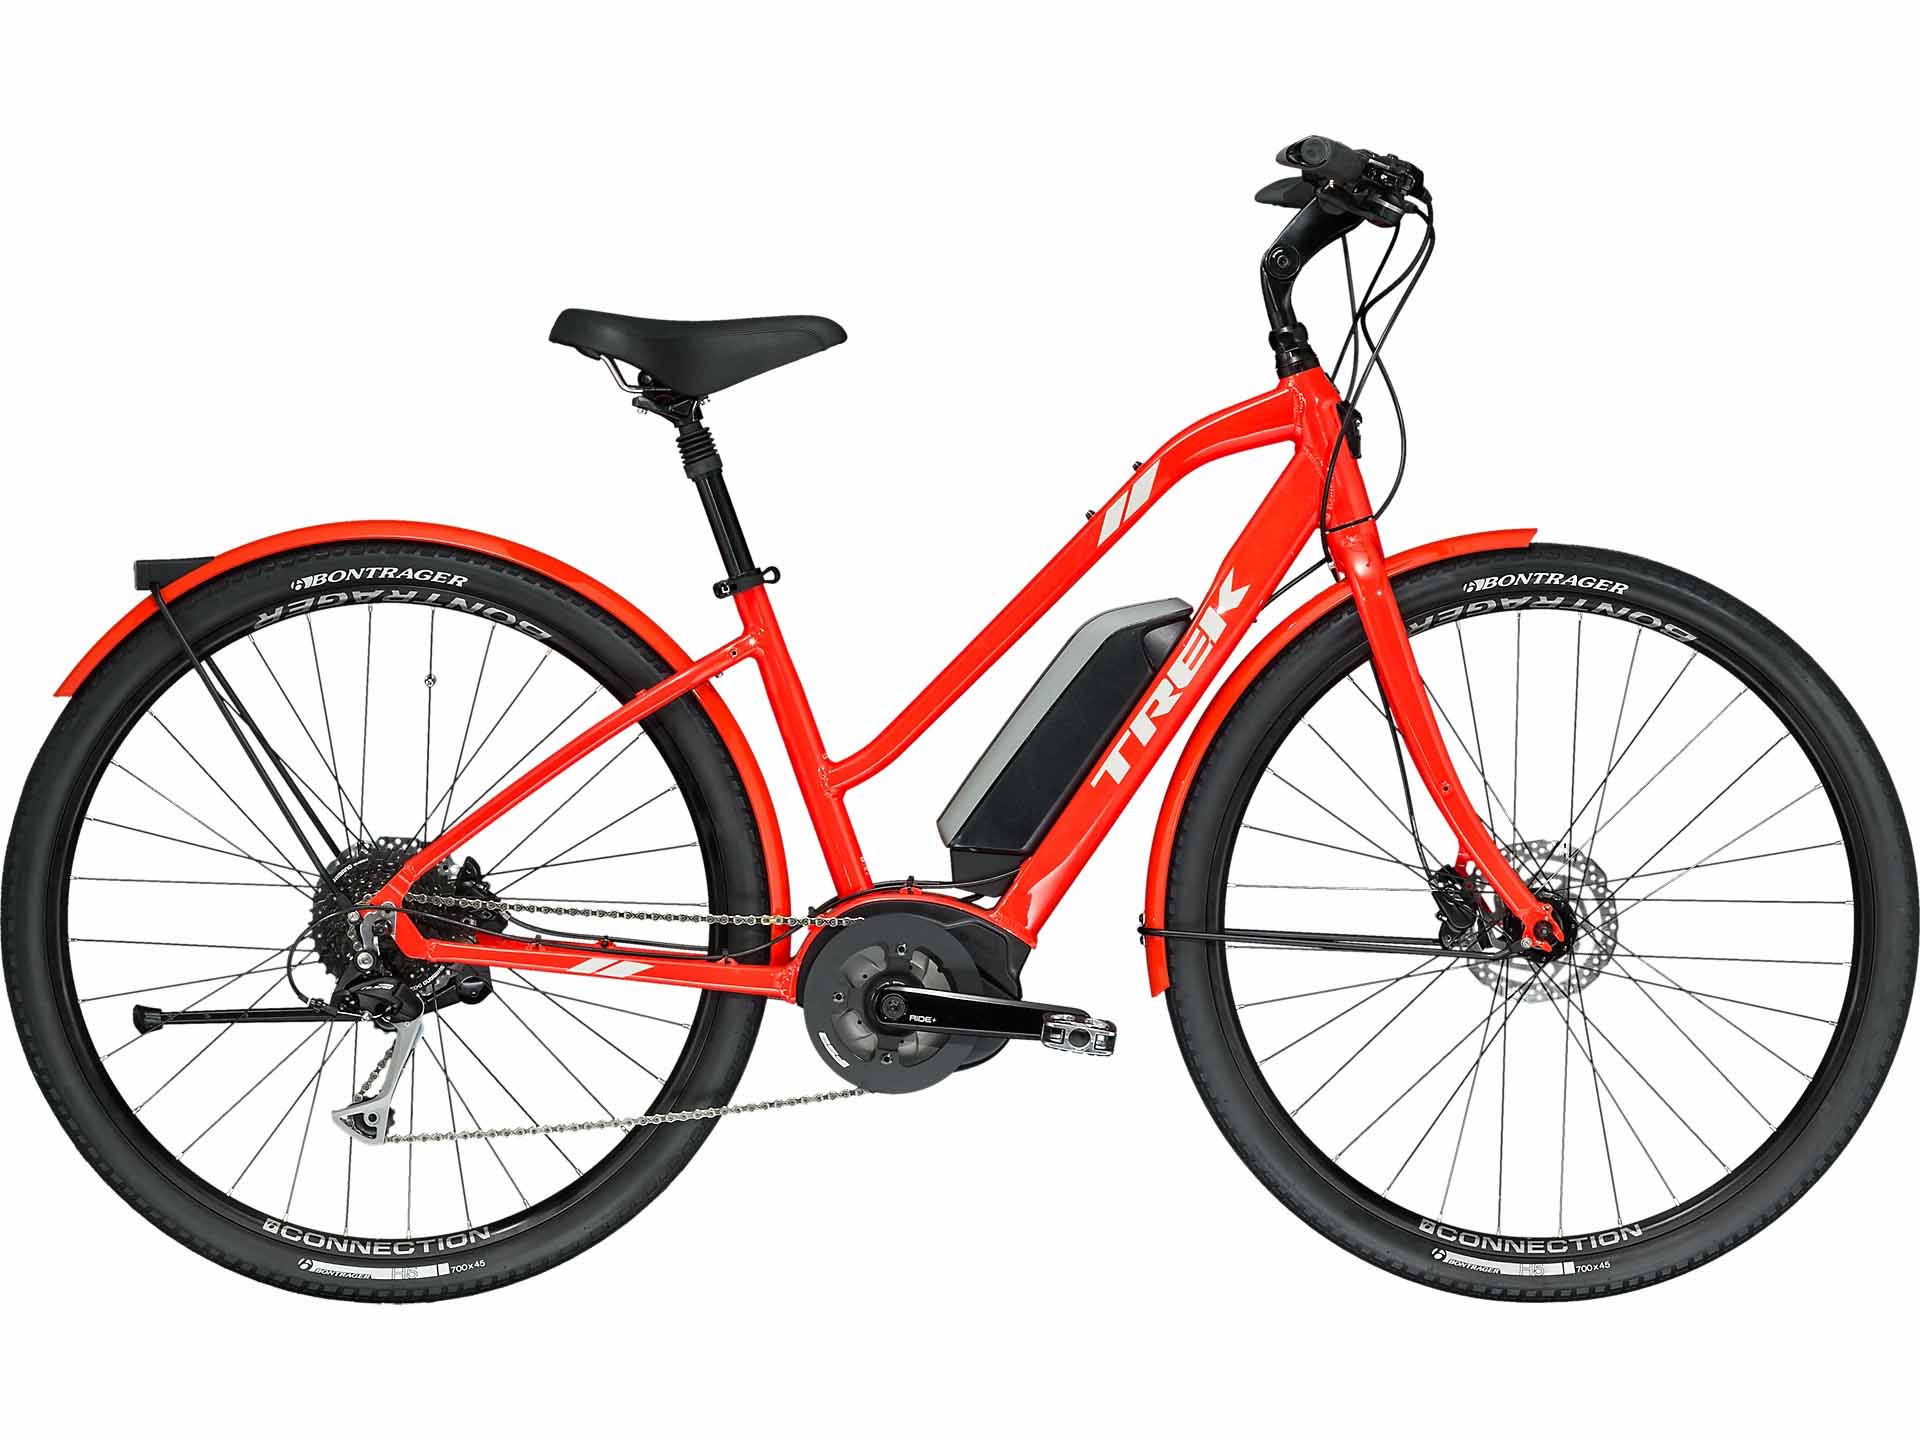 2018-verve-plus-low-step-red - pedego st service for cyclists